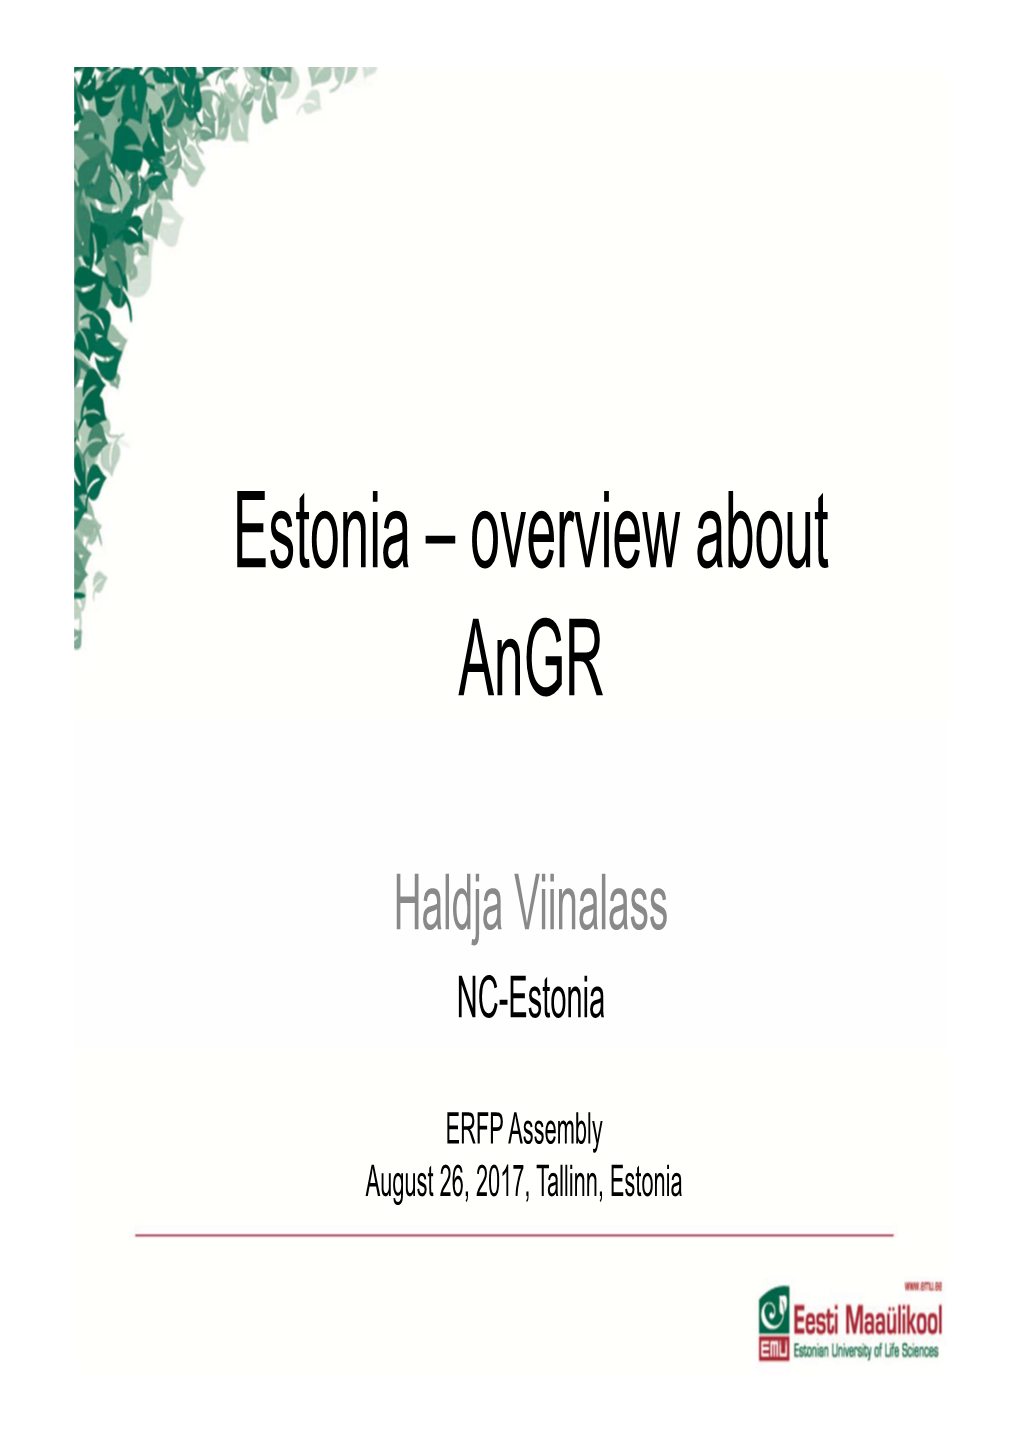 Estonia – Overview About Angr